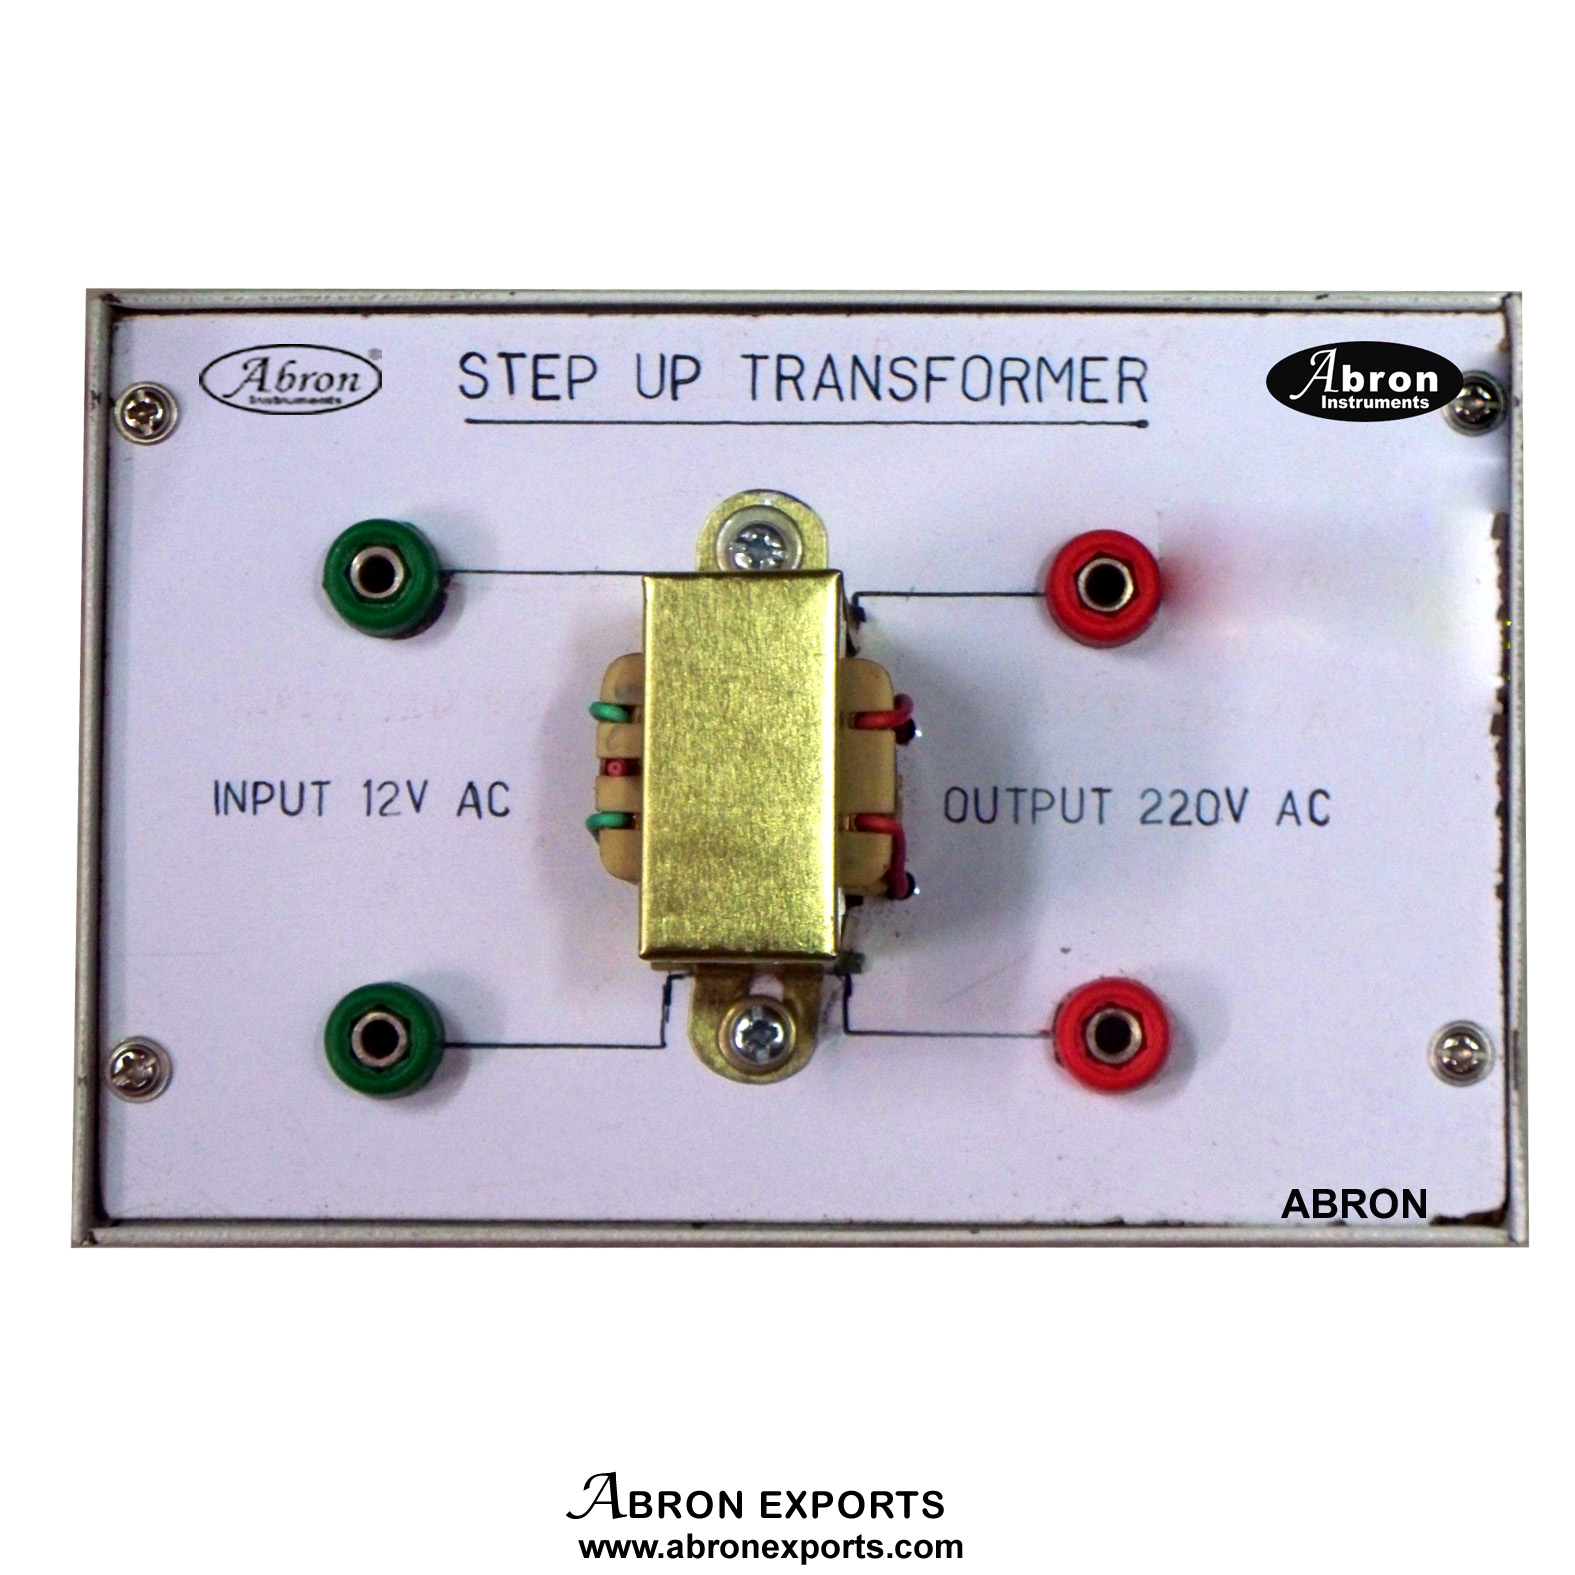 Demonstration step up transformer on base abron electronic etb trainer with power supply w AE-1229C